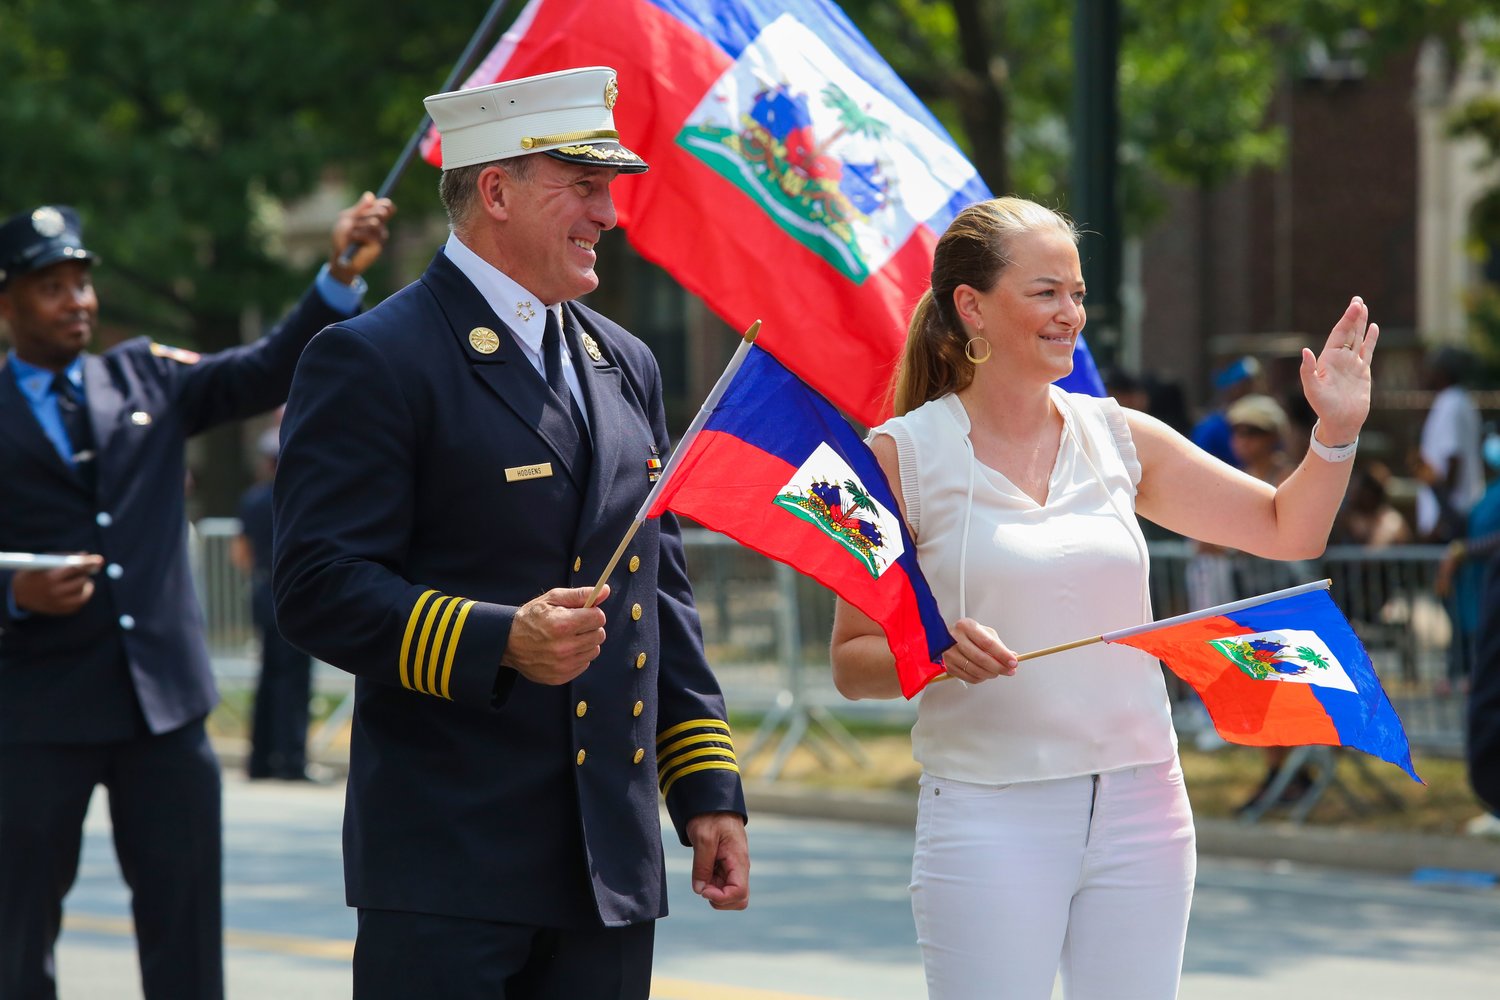 Then-acting FDNY Commissioner Laura Kavanagh and Chief of Department John Hodgens participated in the 2022 West Indian Day Parade in Brooklyn along with FDNY members last September. Hodgens and Chief of Fire Operations Joseph Esposito, the department’s two top uniformed officials, tendered their resignations Sunday following Kavanagh’s demotion of three department assistant chiefs.